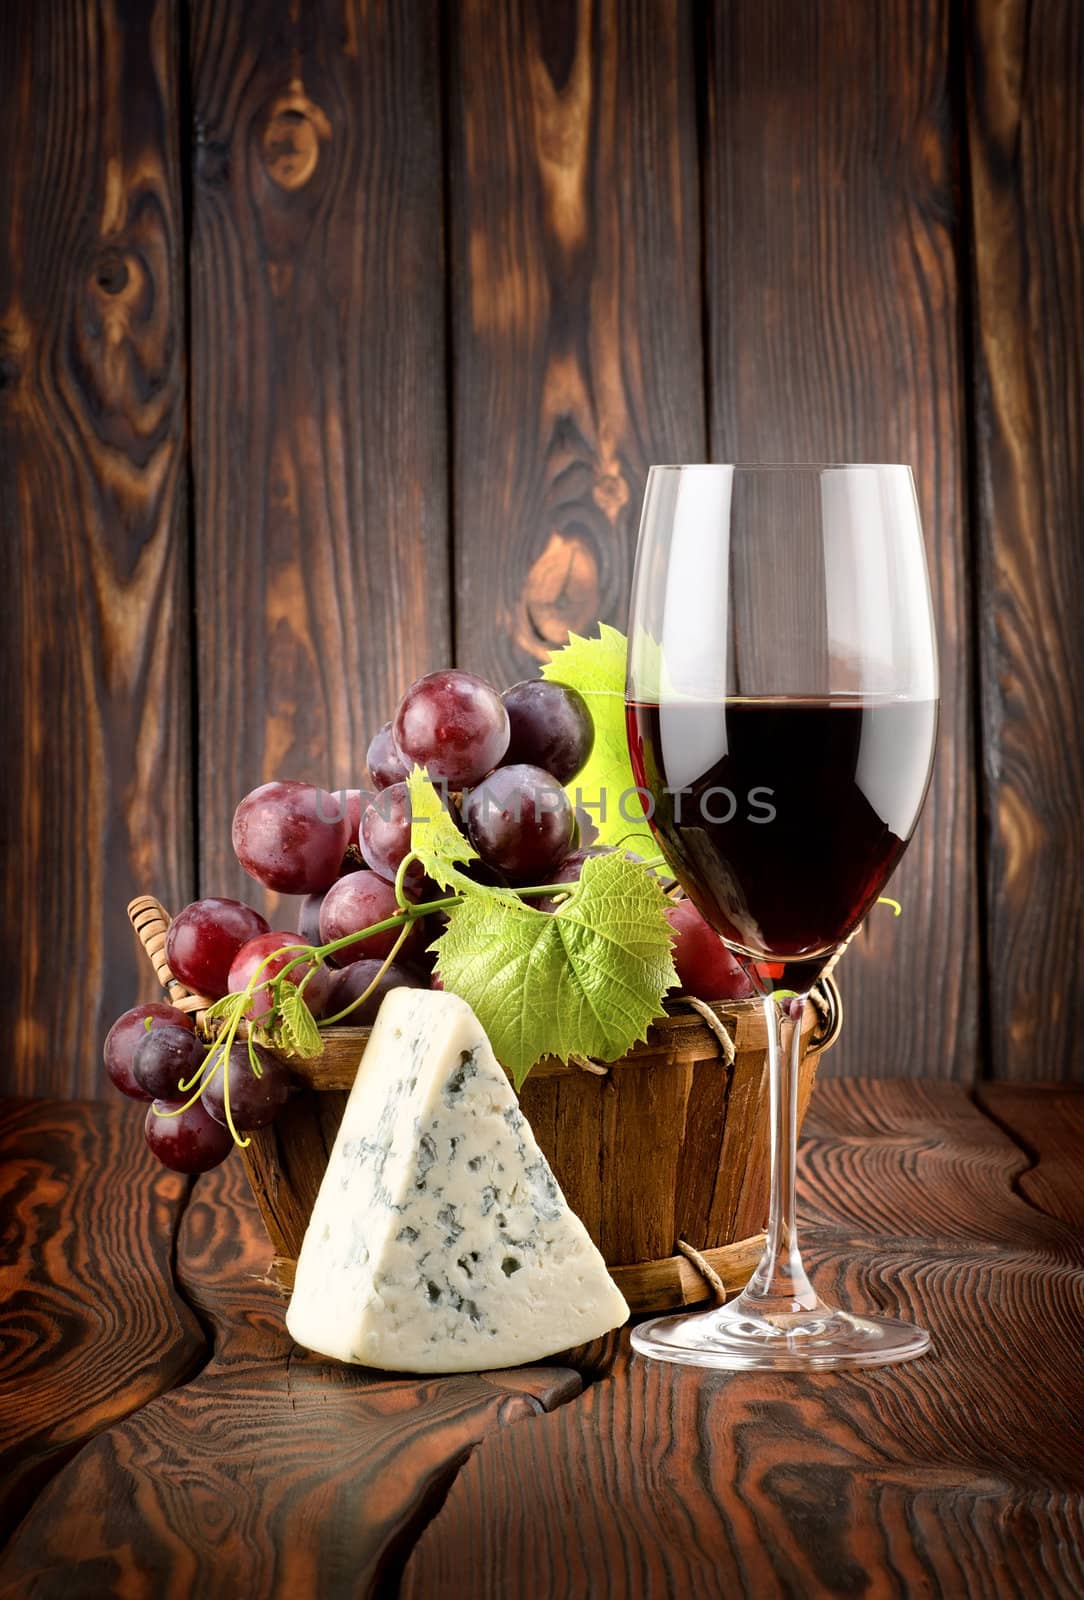 Wine glass and grapes in a basket on a wooden background